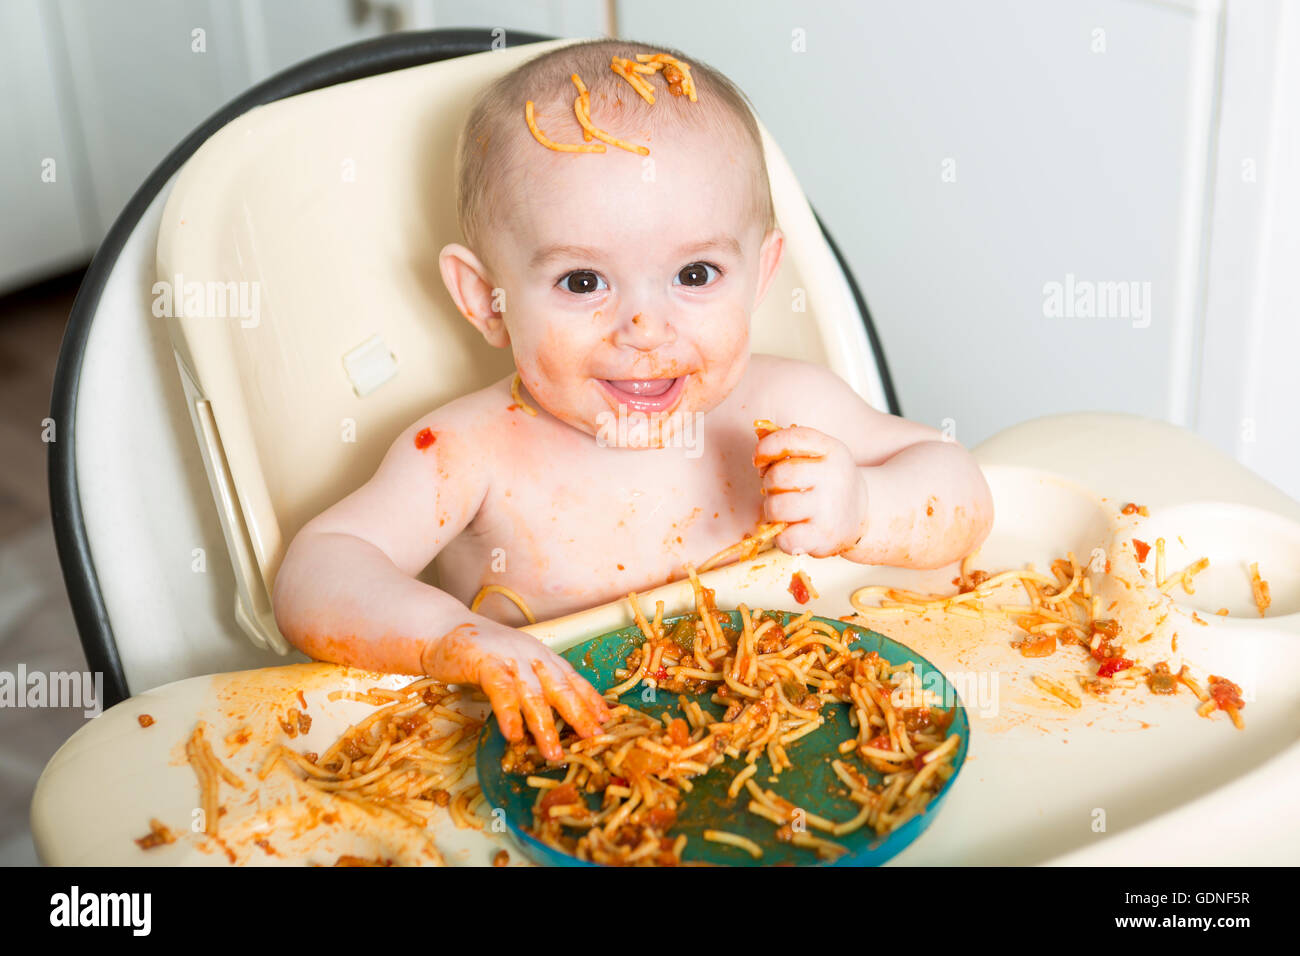 Little b eating her dinner and making a mess Stock Photo